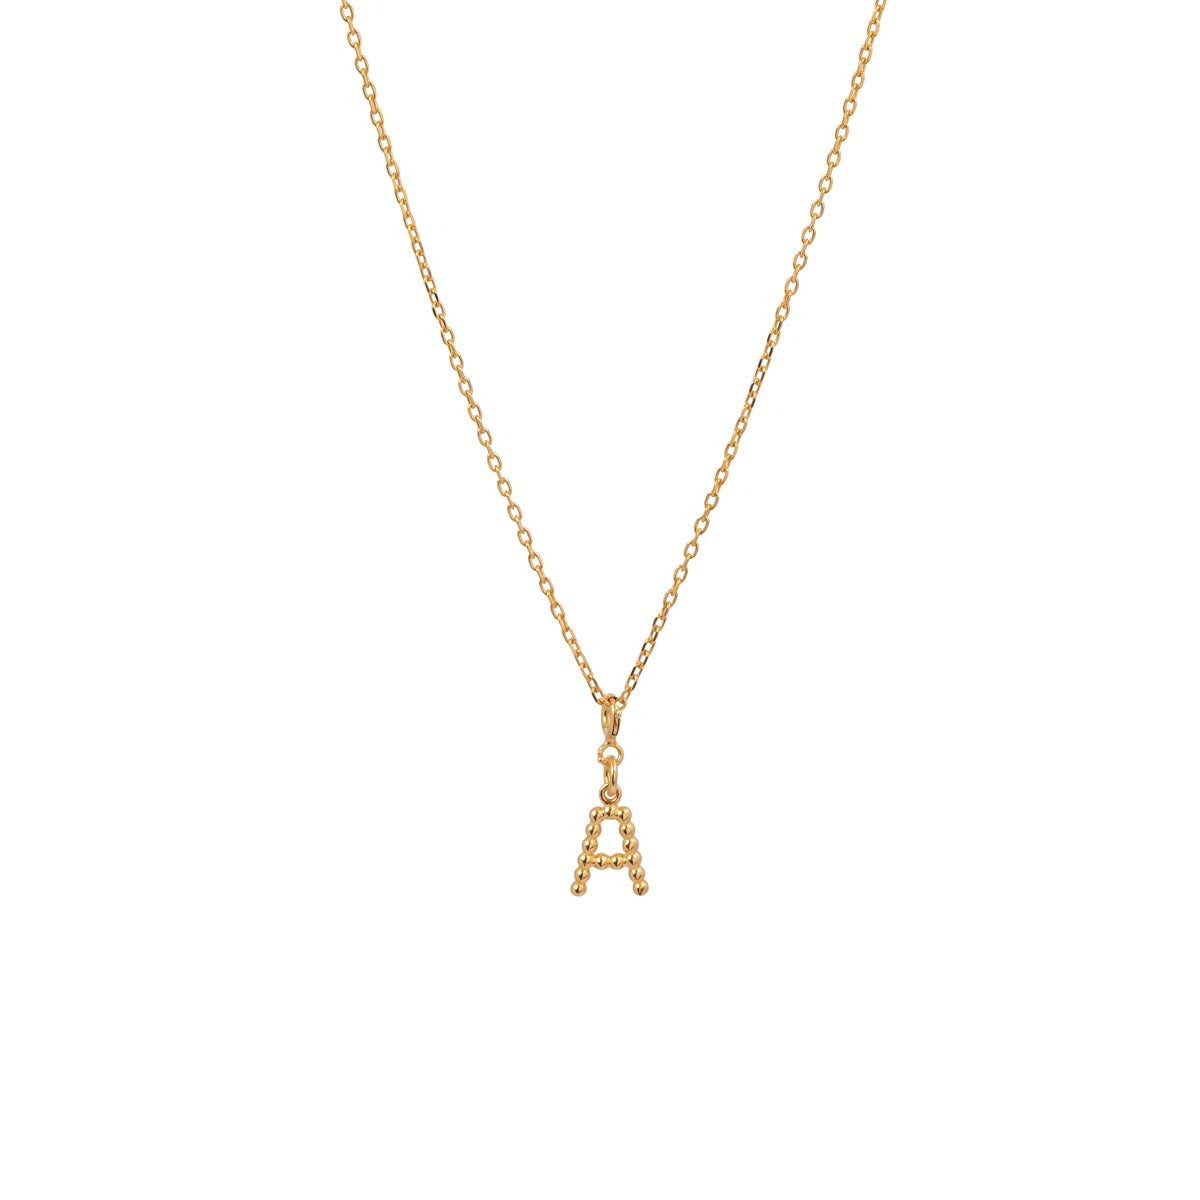 Yllätys Monogram Necklace A, gold-plated silver